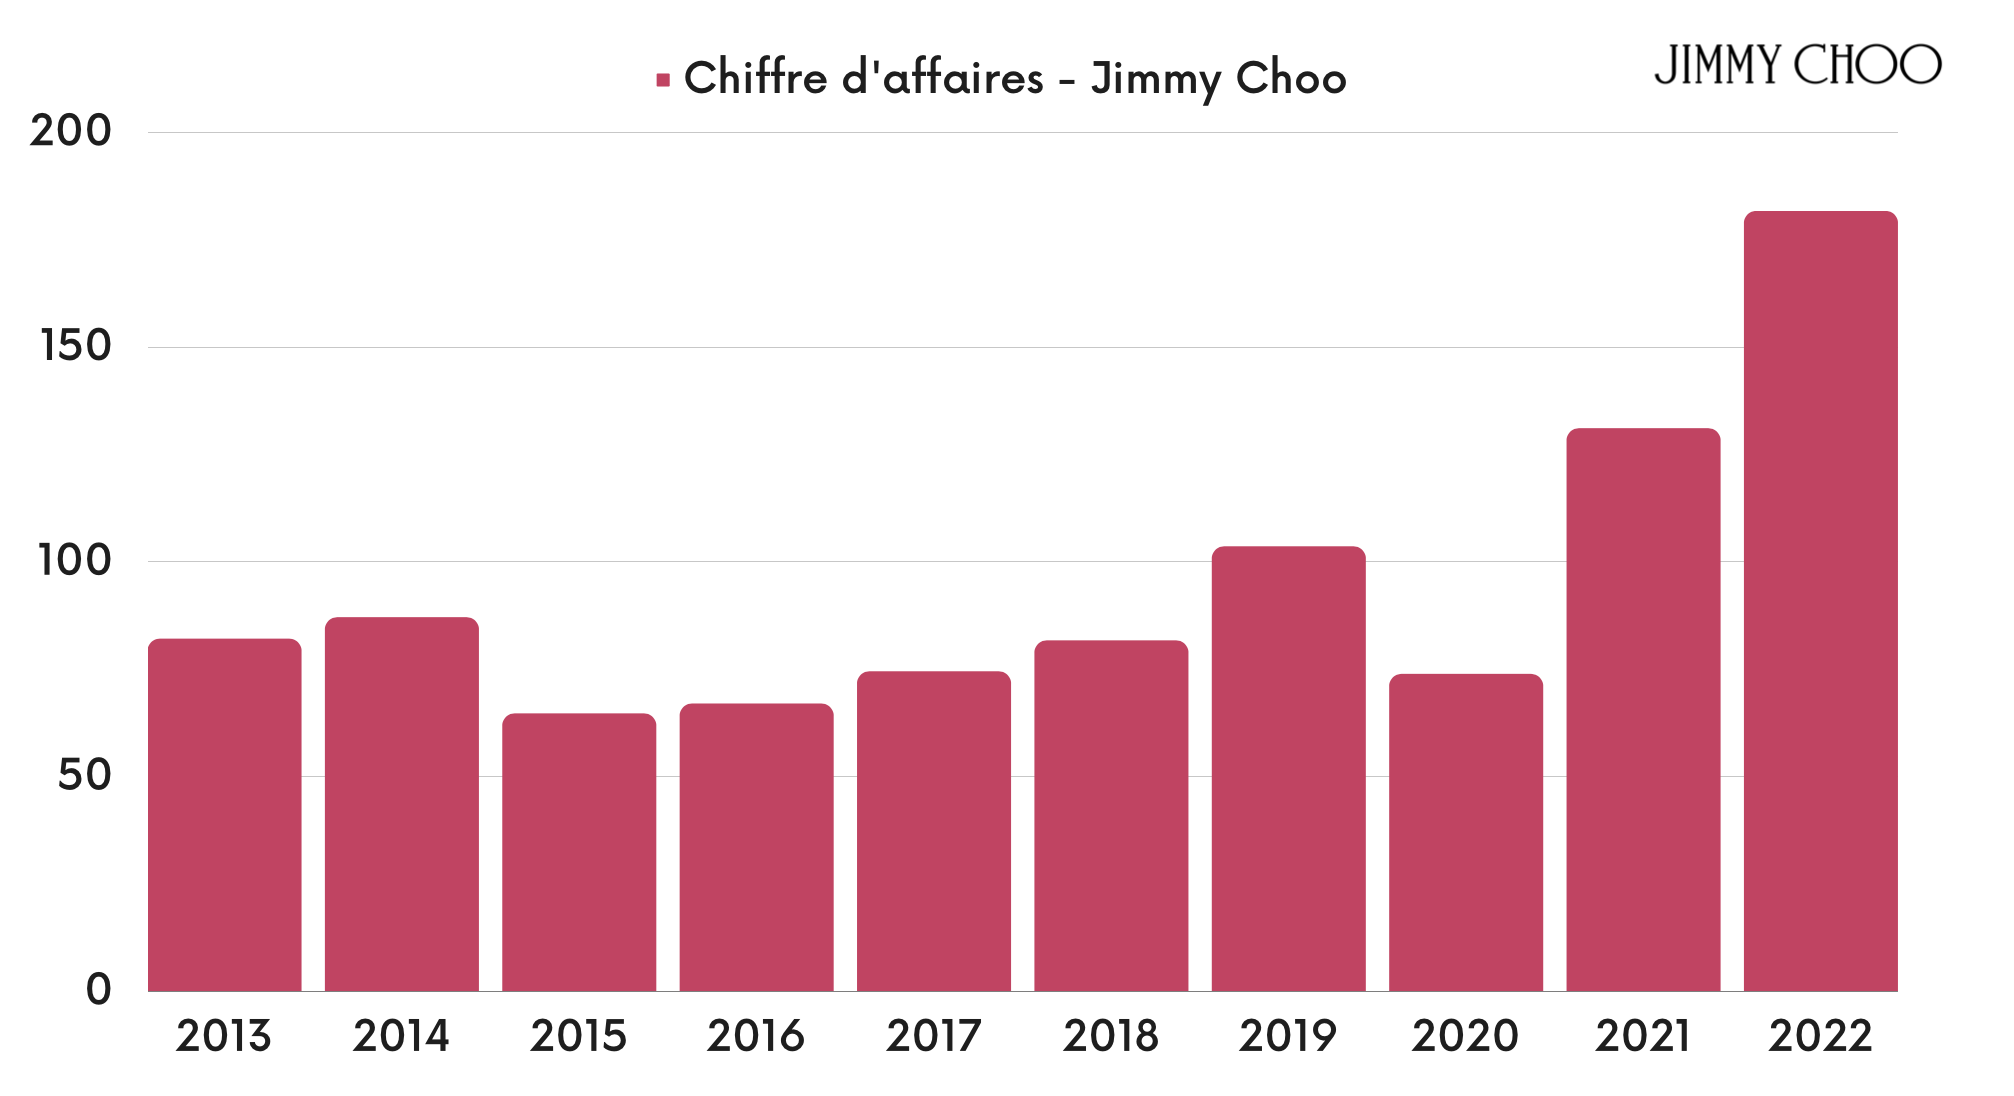 Jimmy Choo - Chiffre d'affaires - Interparfums